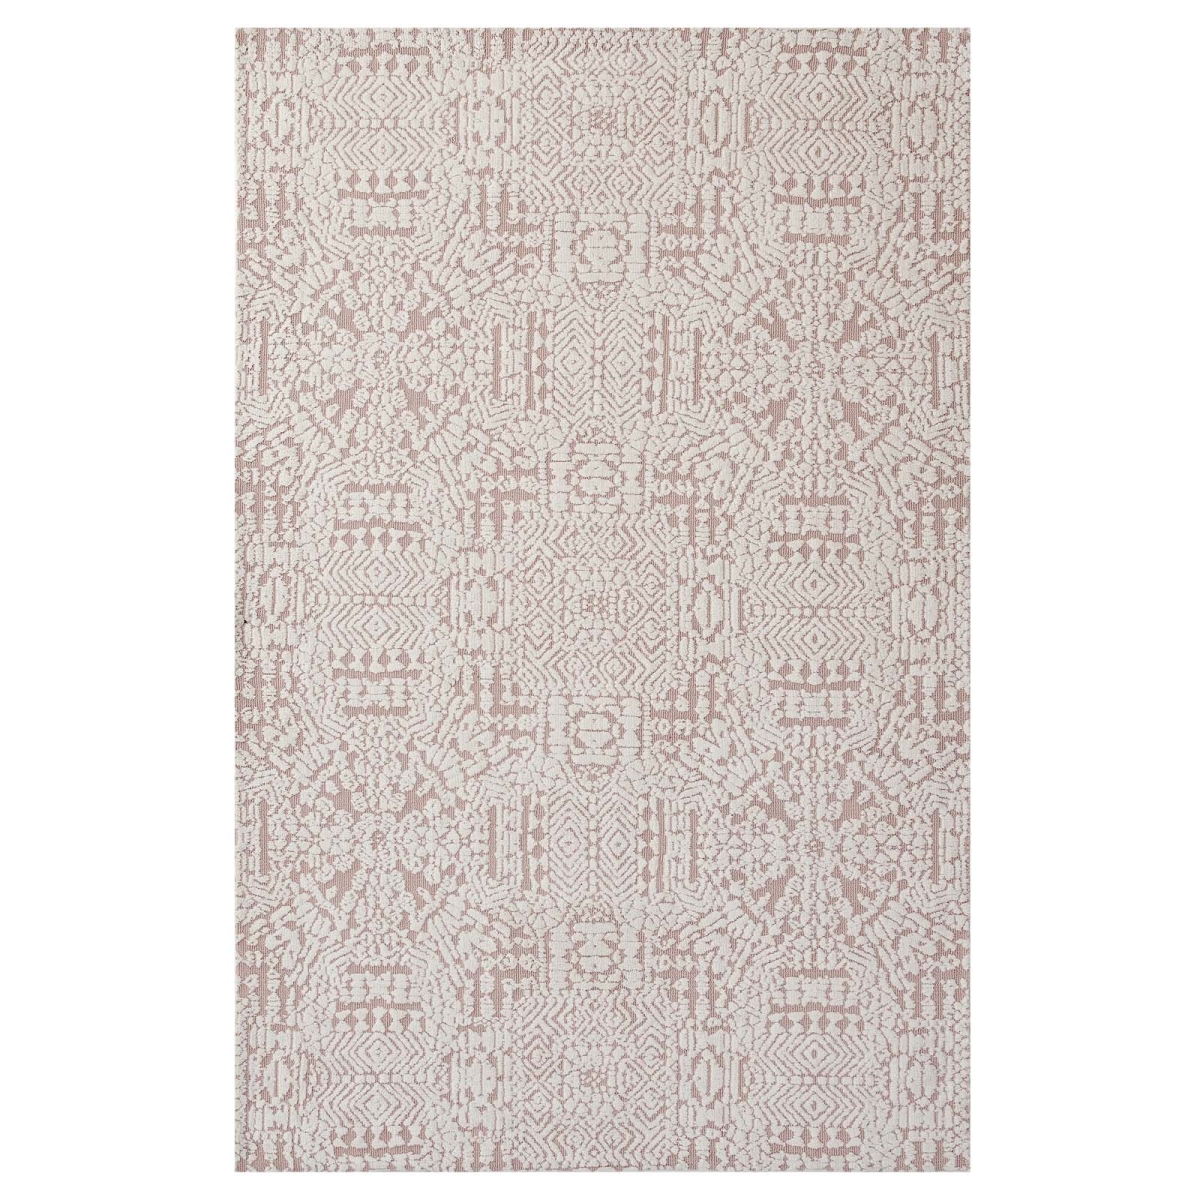 R-1018b-810 8 X 10 Ft. Javiera Contemporary Moroccan Polyester Area Rug - Ivory & Cameo Rose, 0.5 X 96 X 120 In.